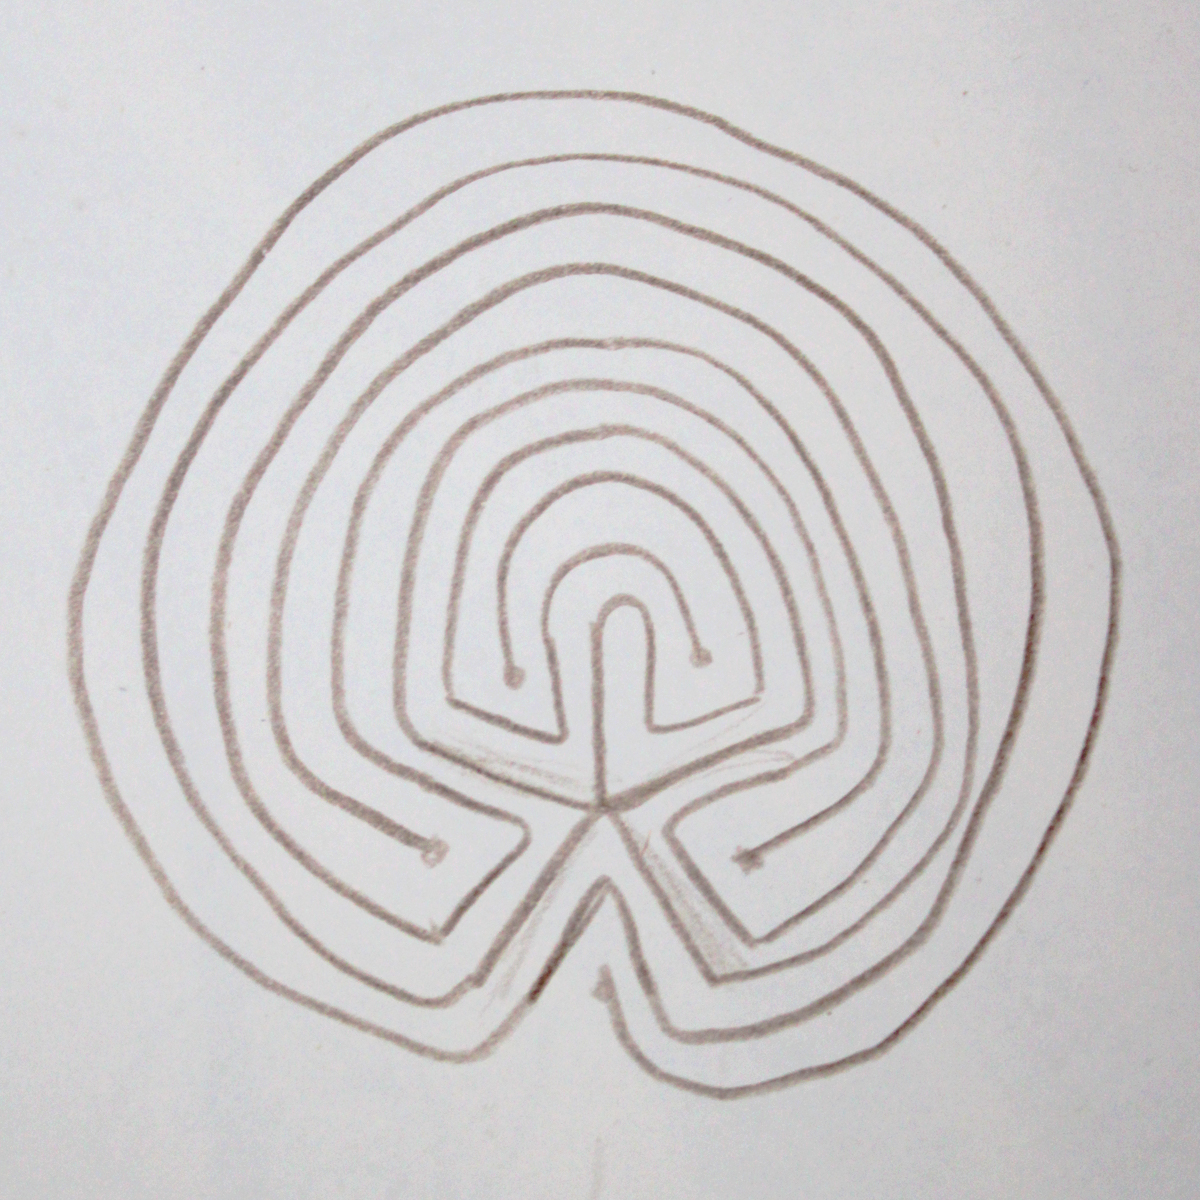 A drawing of a variation on a classic-style labyrinth with a 5-point centre, drawn in thin brown lines on a plain white background.